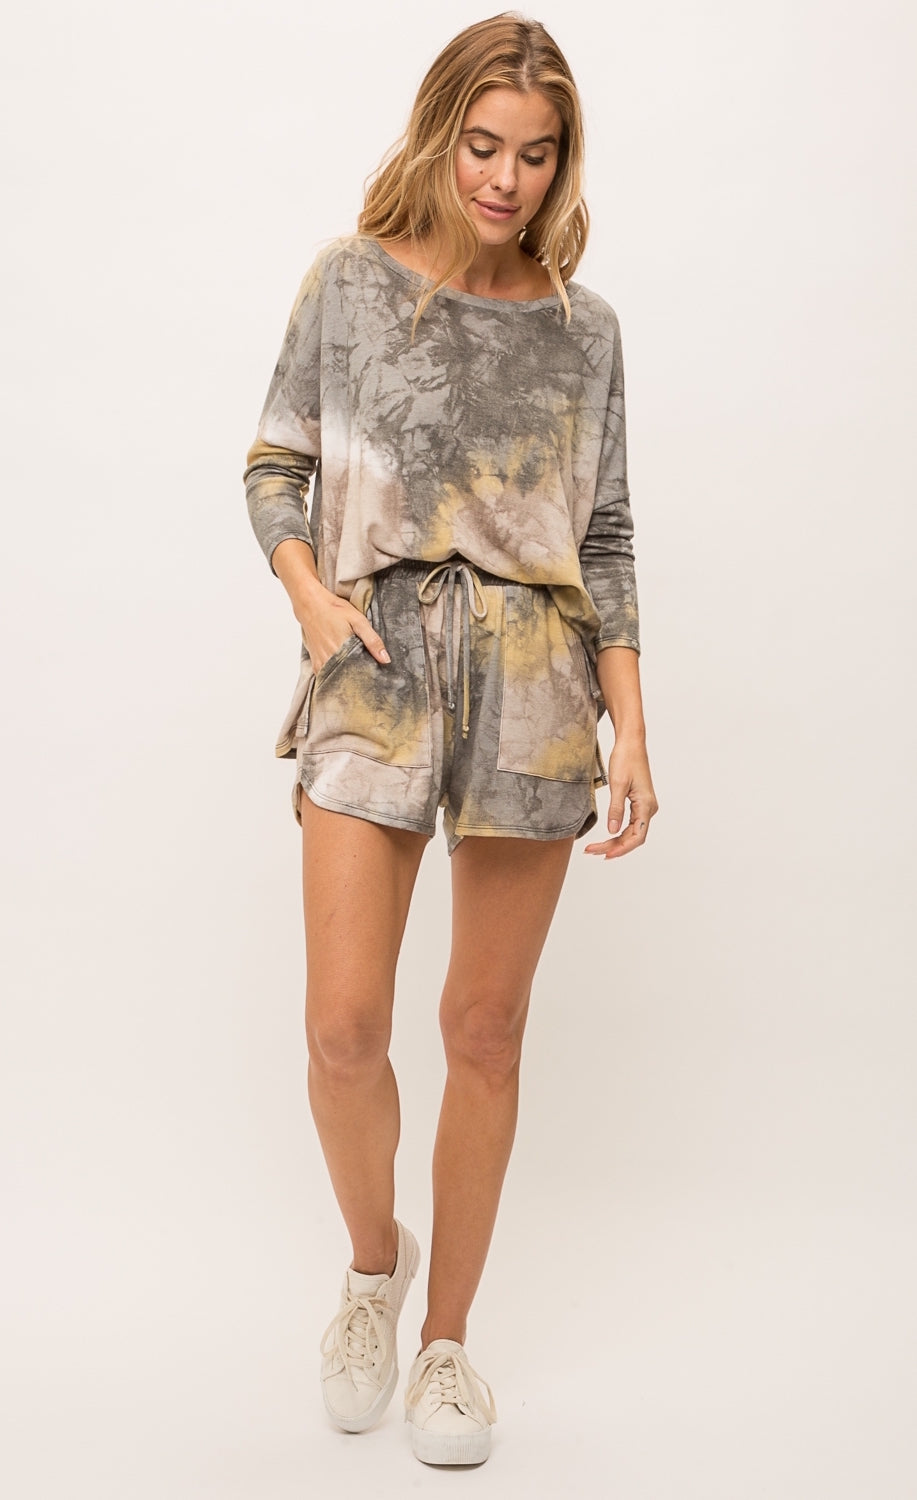 Front full body view of a woman wearing the mystree bluestone tie dye top. This top is a grey and yellow tie top with long sleeves and a boxy fit.